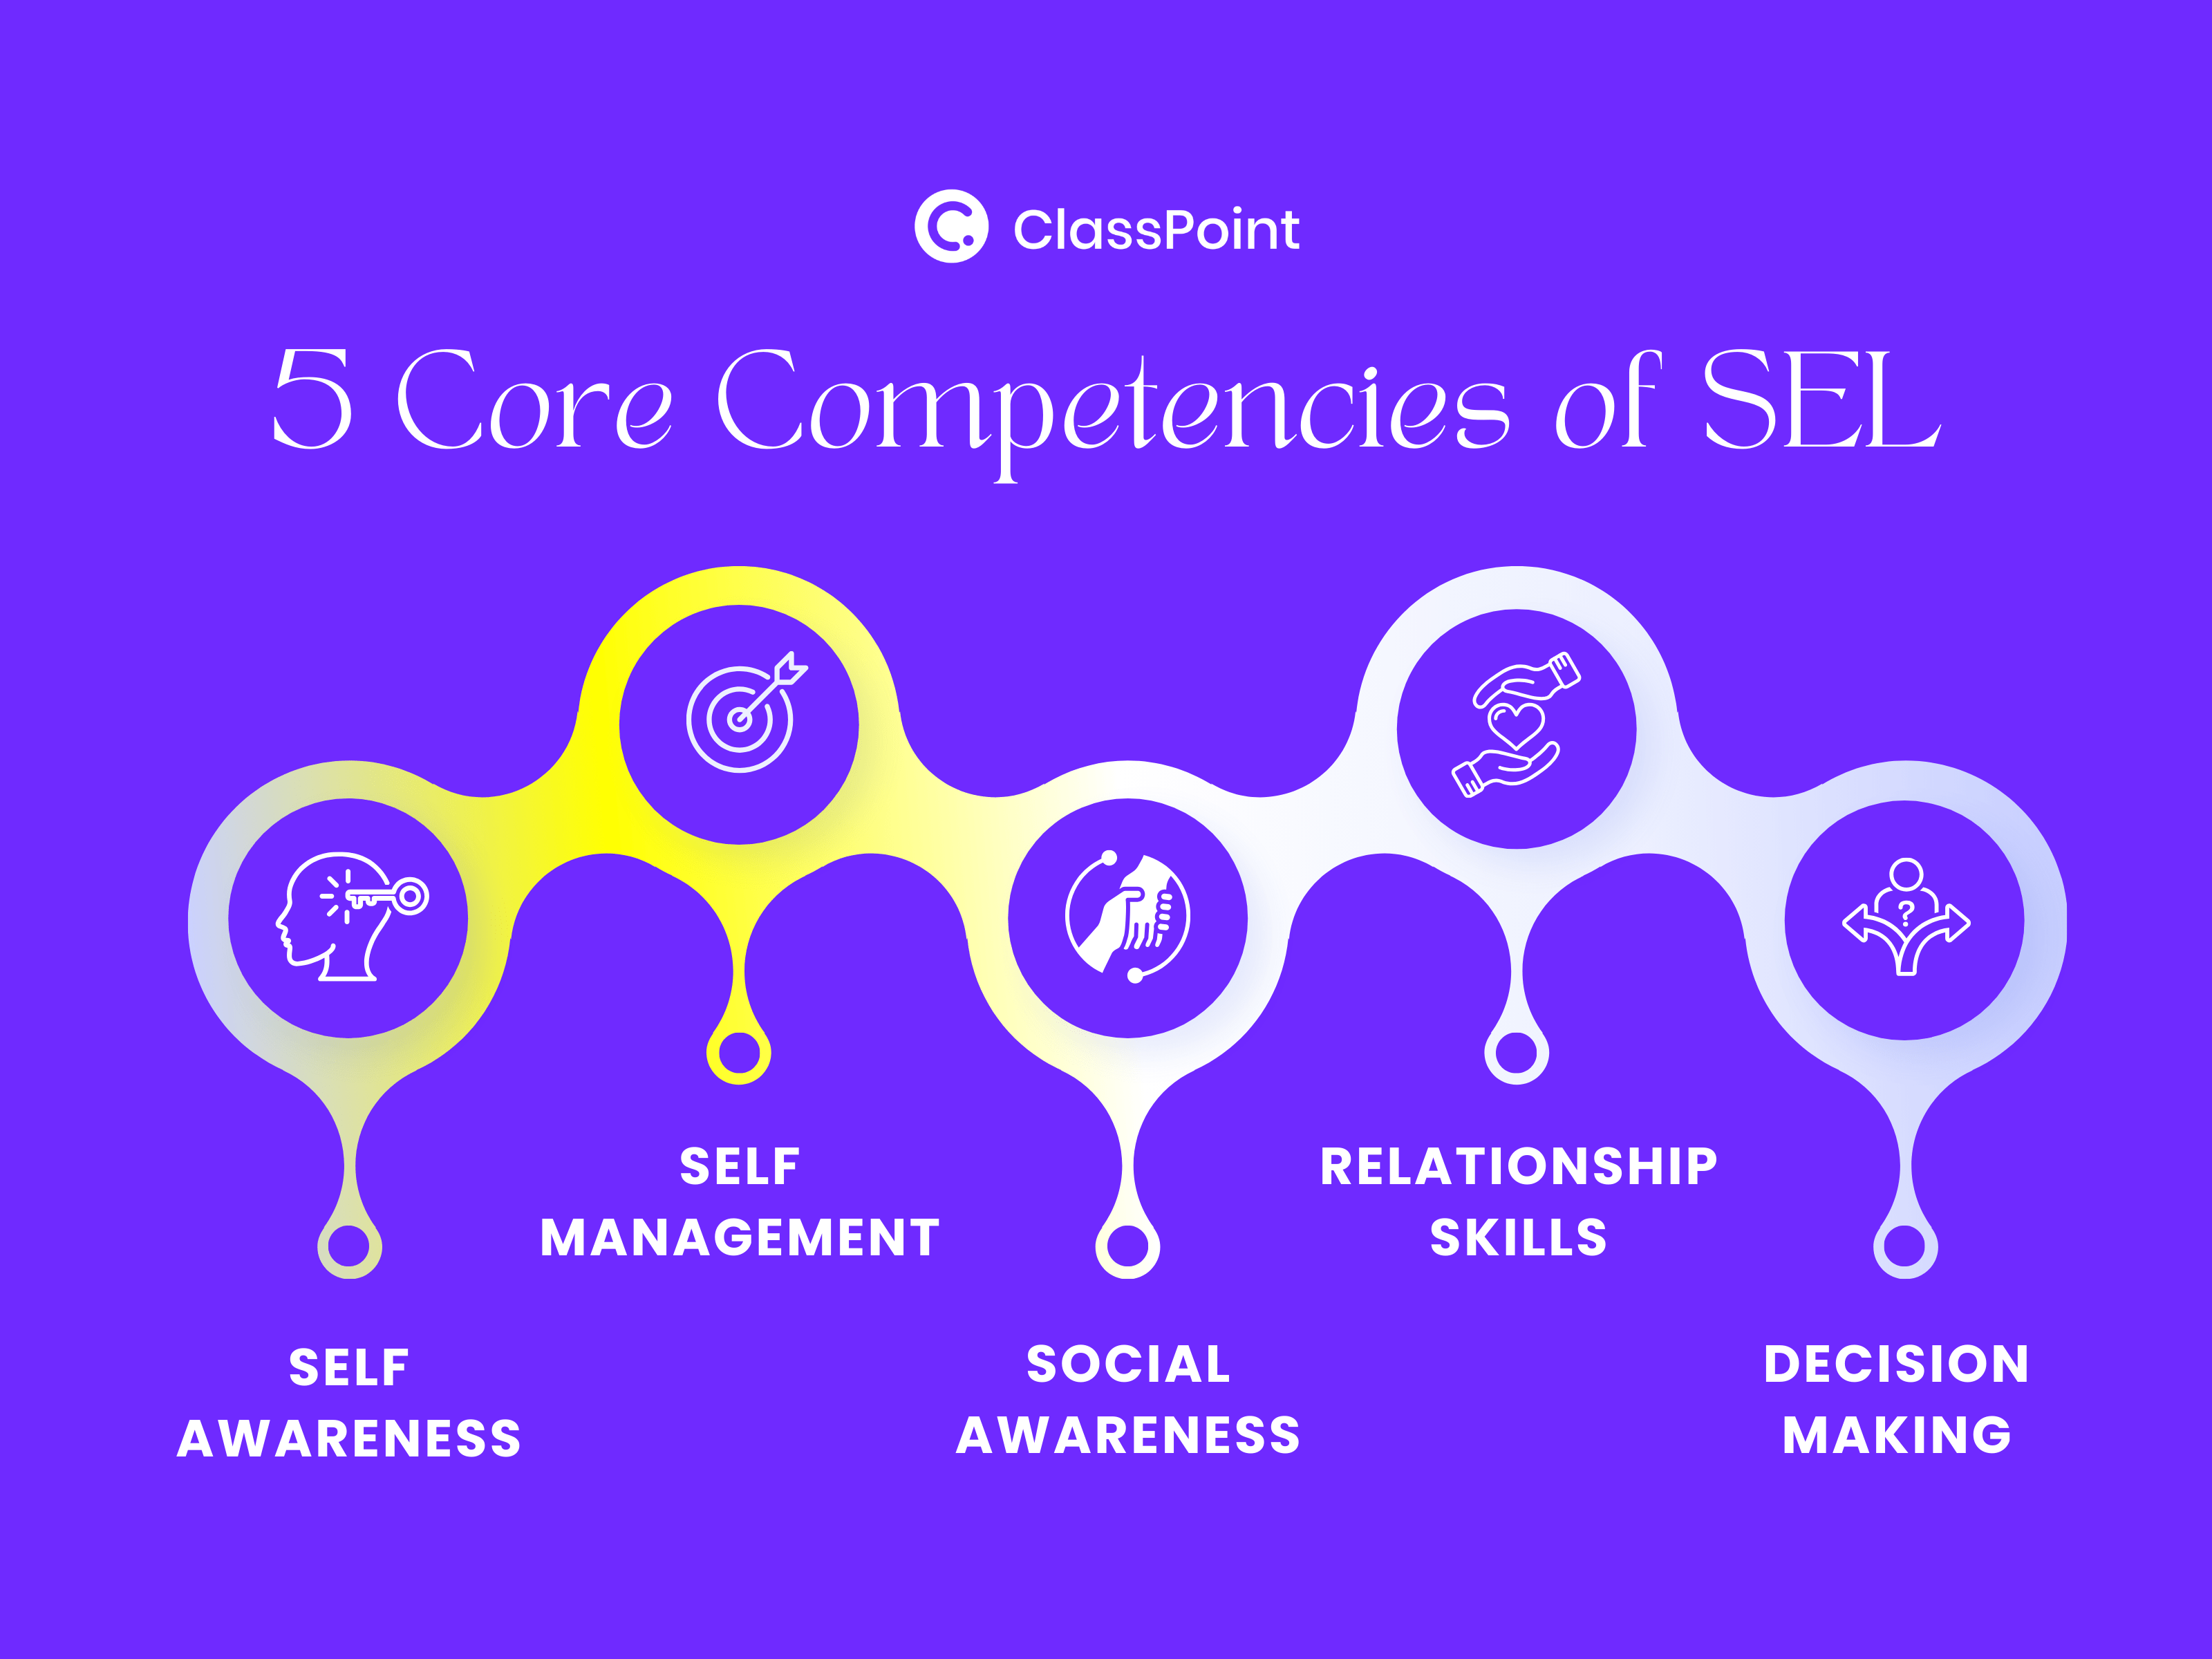 5 core competencies of social-emotional learning